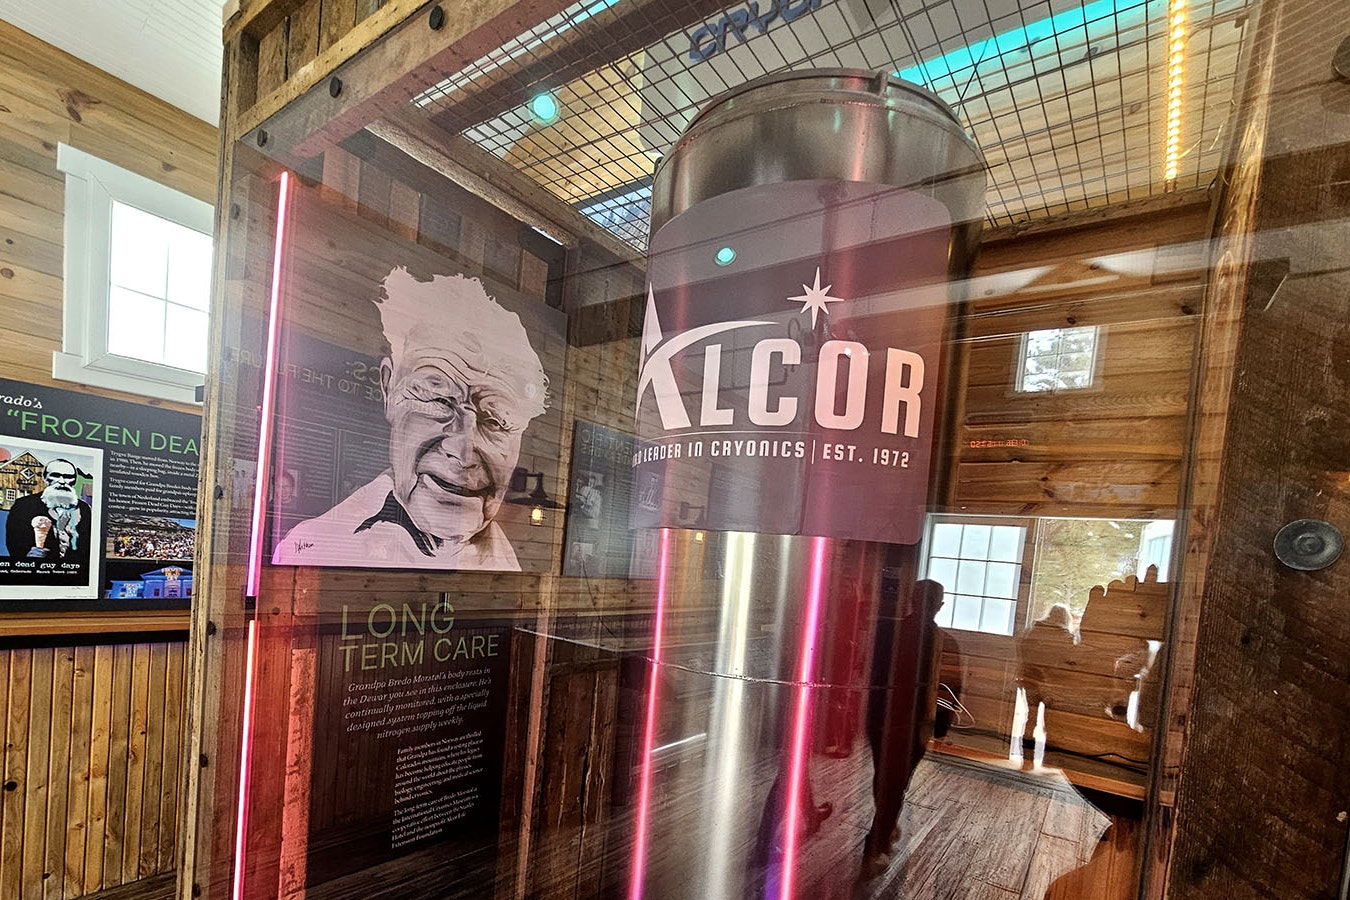 The smiling face of Bredo Morstol is among the first things visitors to the world's first International Cryonics Museum will see. The museum is set up at the Stanley Hotel in Estes Park, just a couple hours south of Wyoming.